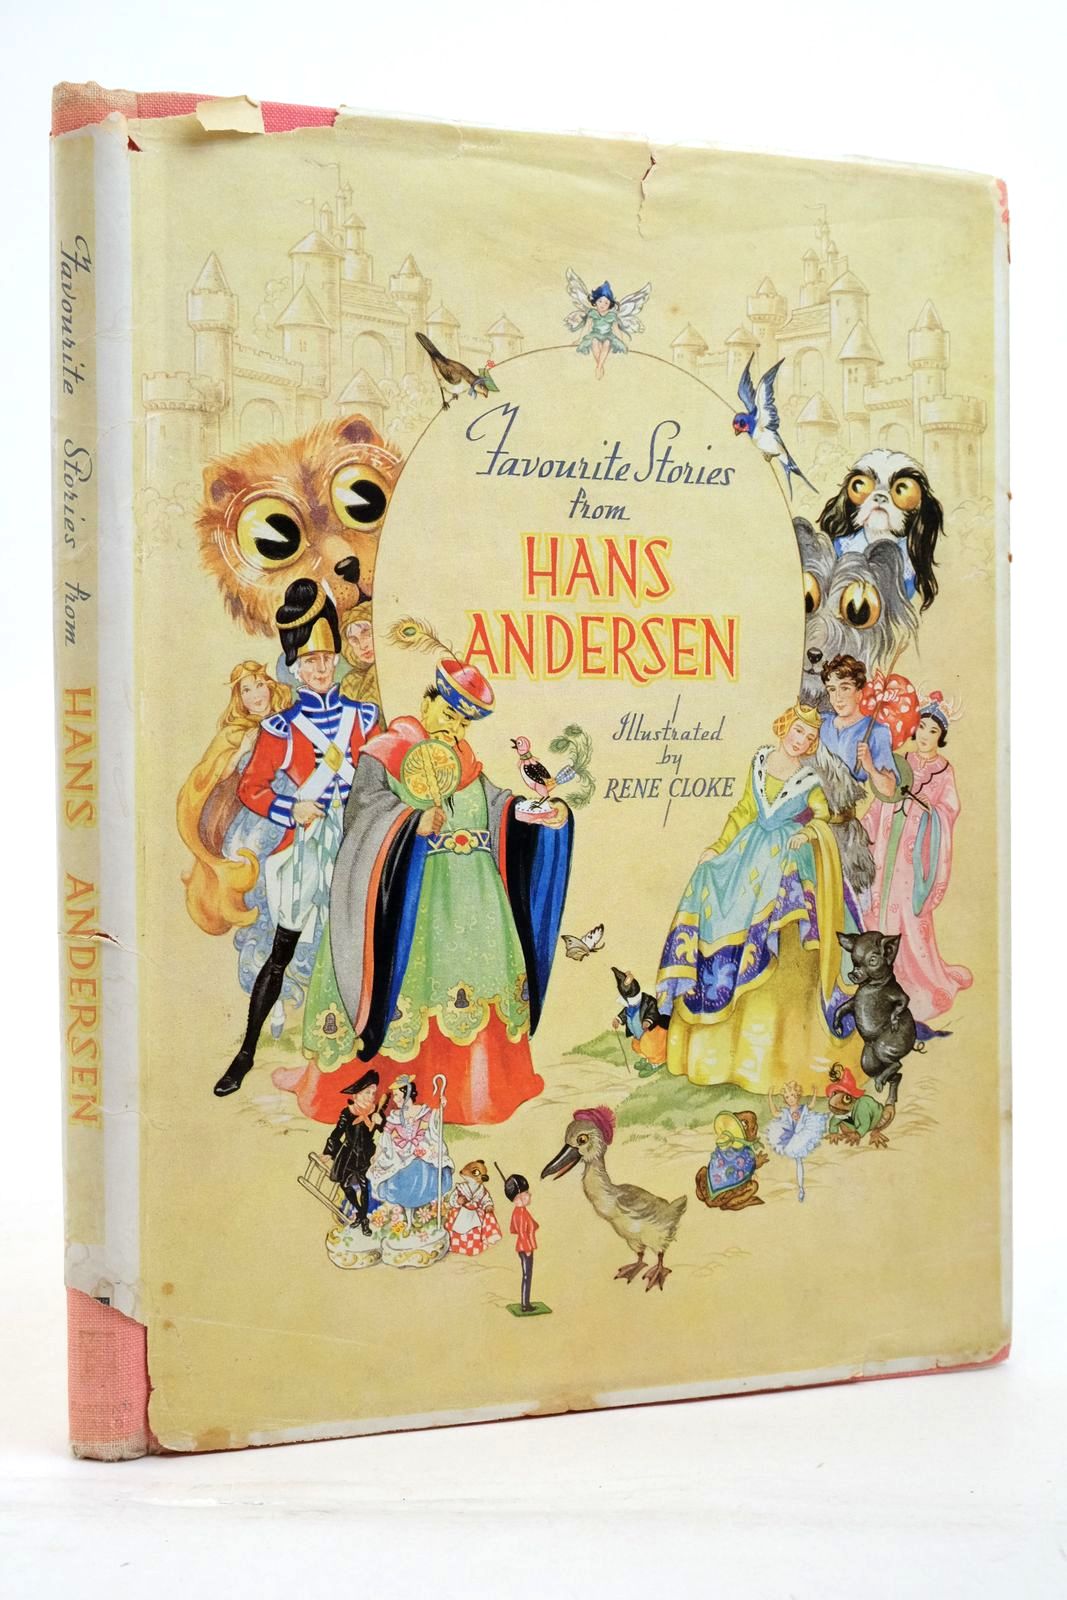 Photo of FAVOURITE STORIES FROM HANS ANDERSEN written by Andersen, Hans Christian Green, Roger Lancelyn illustrated by Cloke, Rene published by Edmund Ward (STOCK CODE: 2137795)  for sale by Stella & Rose's Books